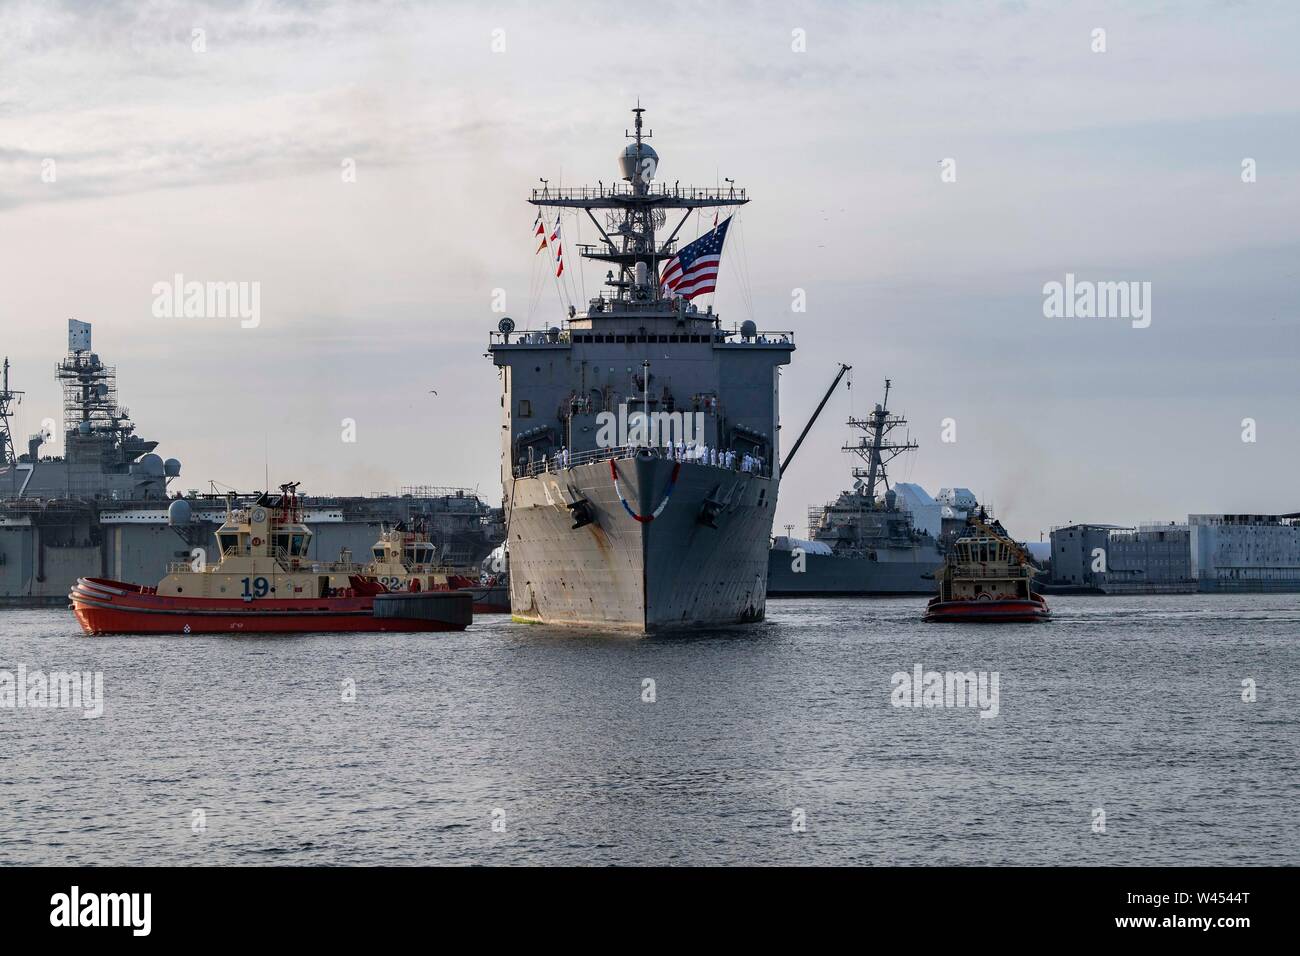 190718-N-QI061-132        NAVAL STATION MAYPORT, Fla. (July 18, 2019) The Whidbey Island-class amphibious dock landing ship USS Fort McHenry (LSD 43) pulls into Naval Station Mayport, Fla. Fort McHenry completed a scheduled deployment as part of the Kearsarge Amphibious Ready Group in support of maritime security operations, crisis response and theater security cooperation, while also providing a forward naval presence. (U.S. Navy photo by Mass Communication Specialist 3rd Class Nathan T. Beard/Released) Stock Photo